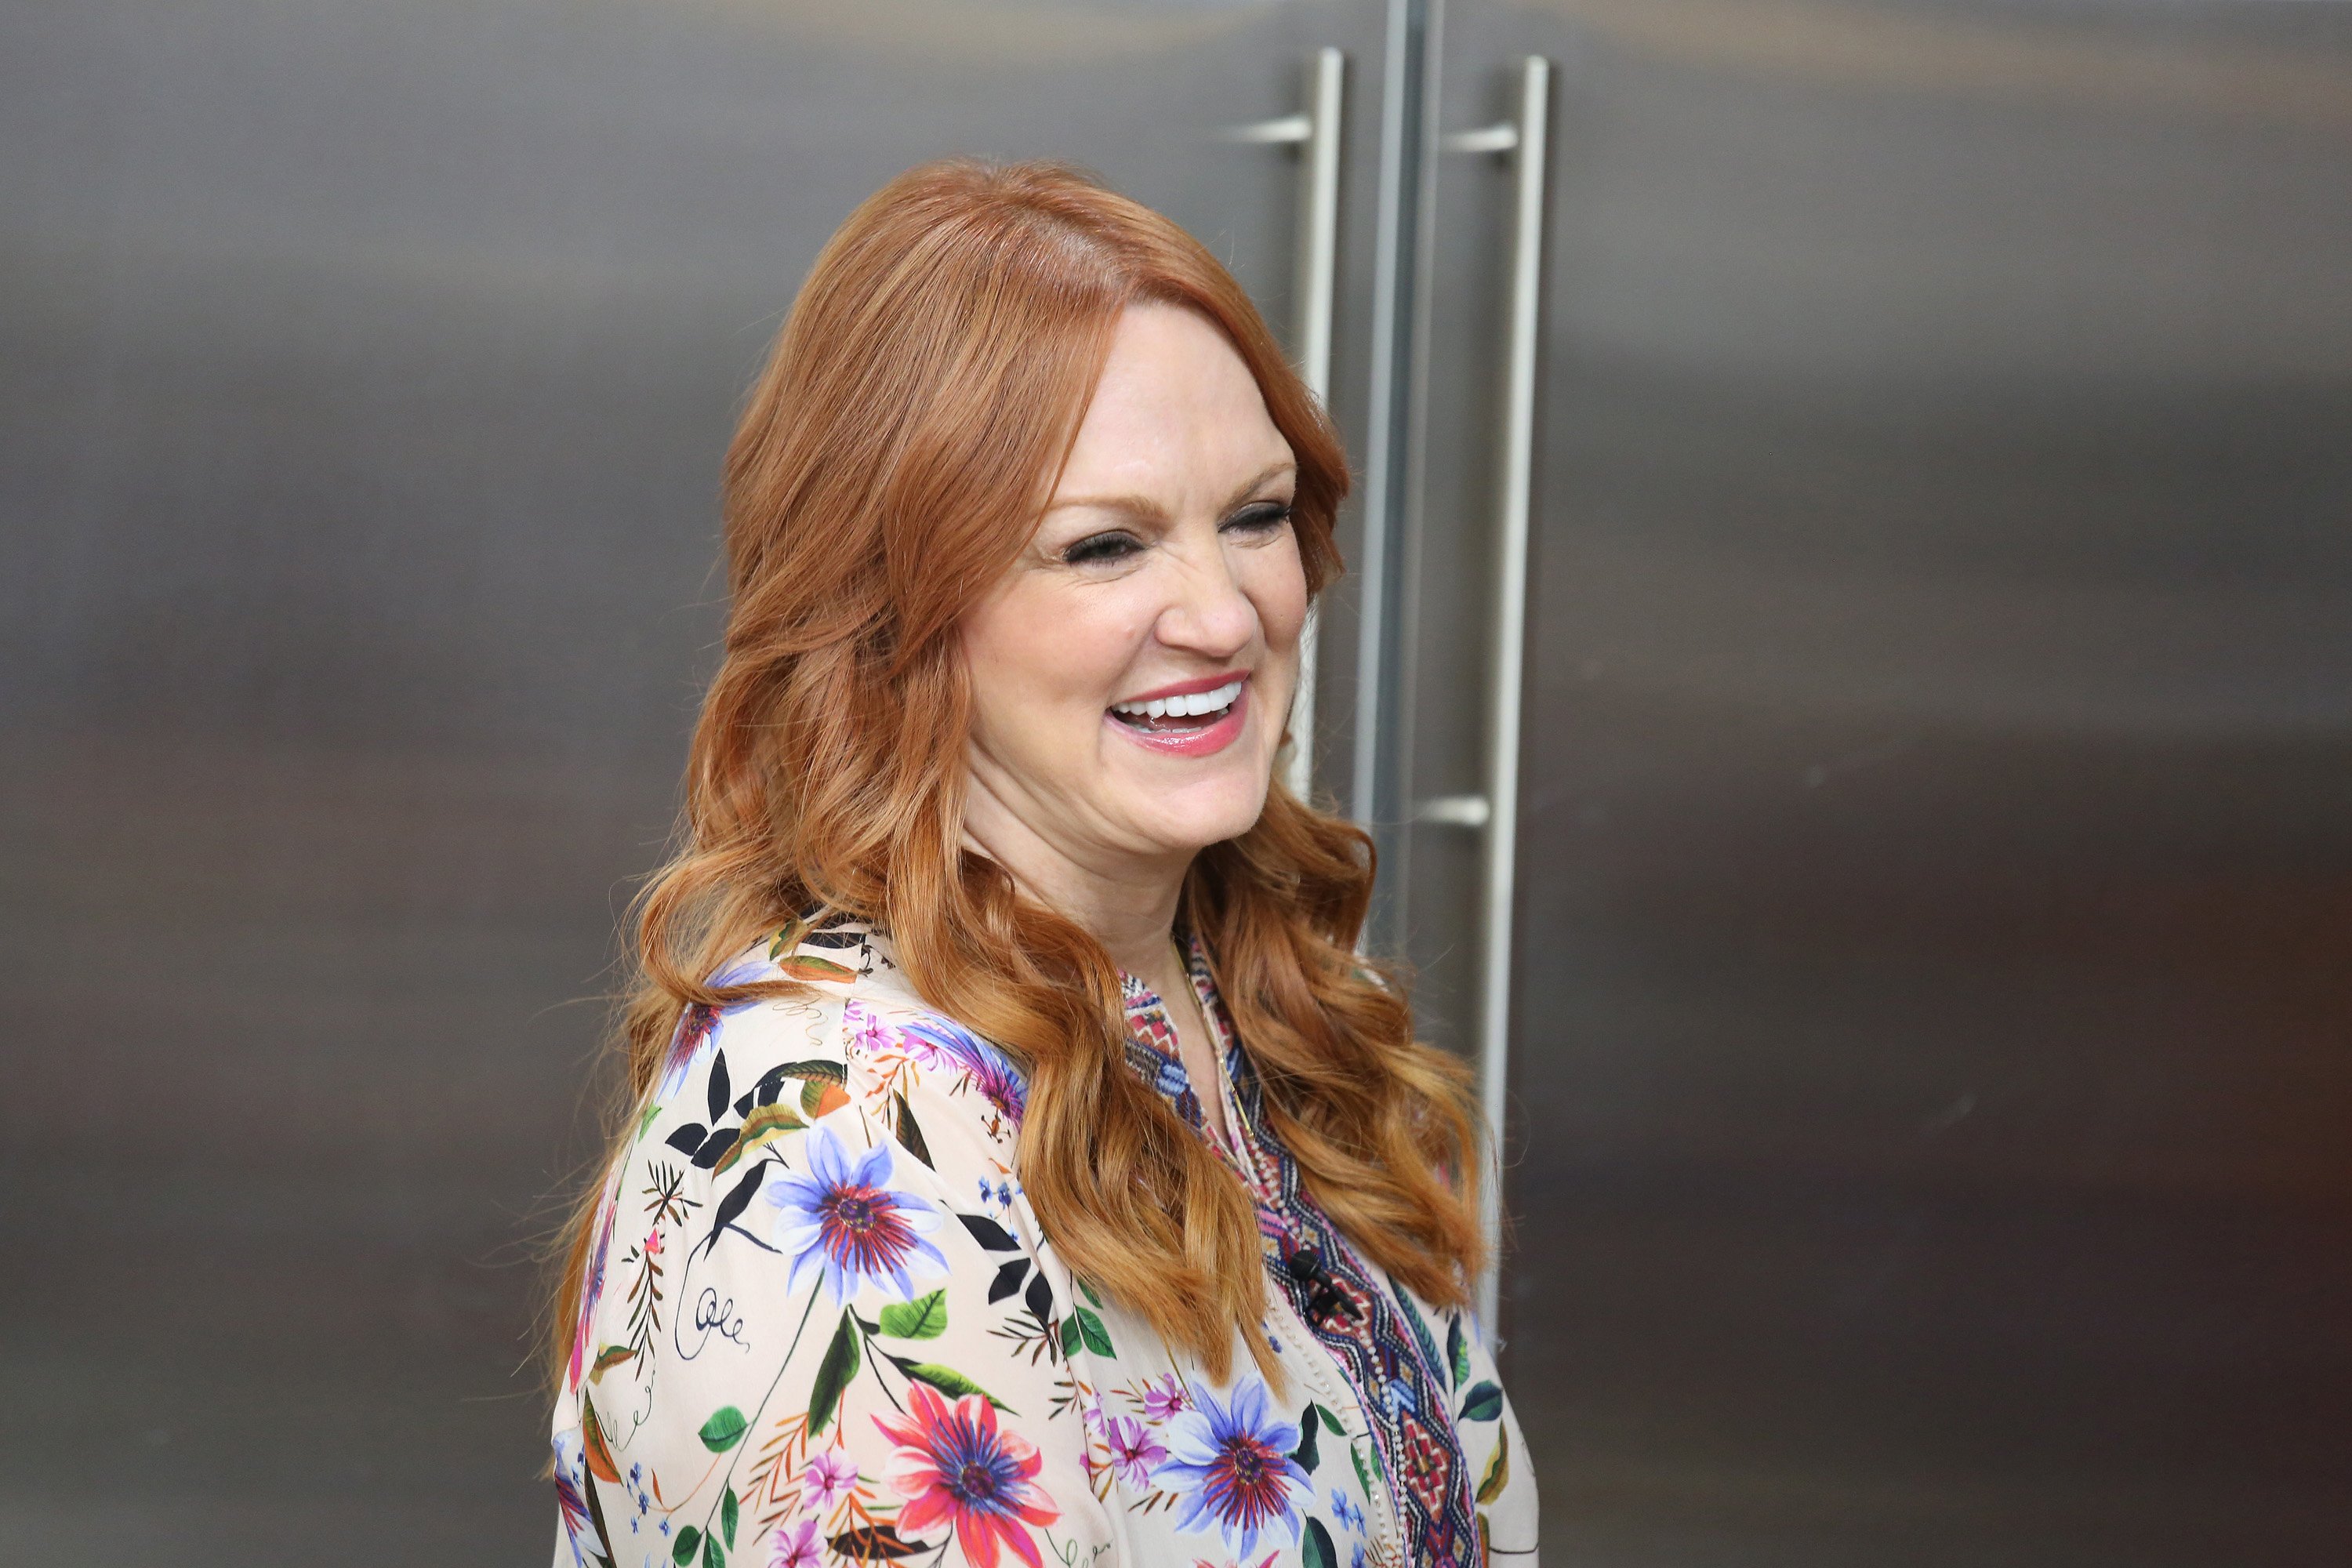 Ree Drummond of Food Network's 'The Pioneer Woman' smiles for the camera in a multi-print blouse